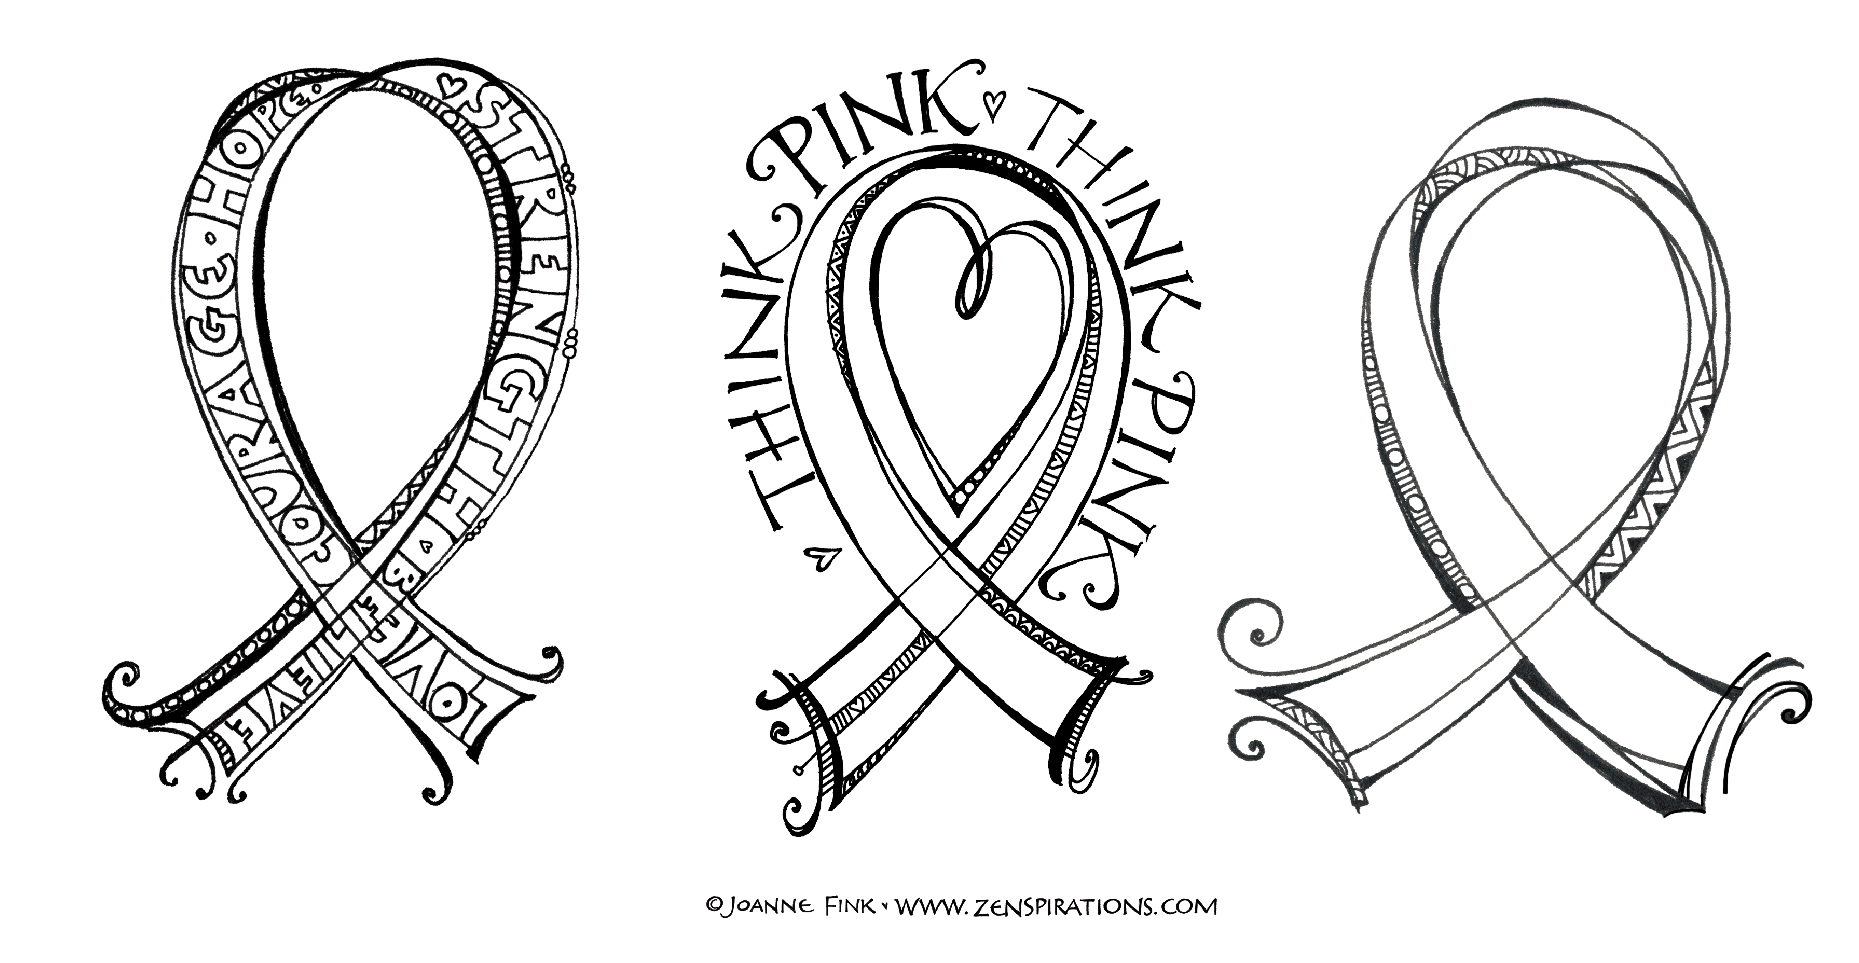 Think pink free downloadable coloring pages